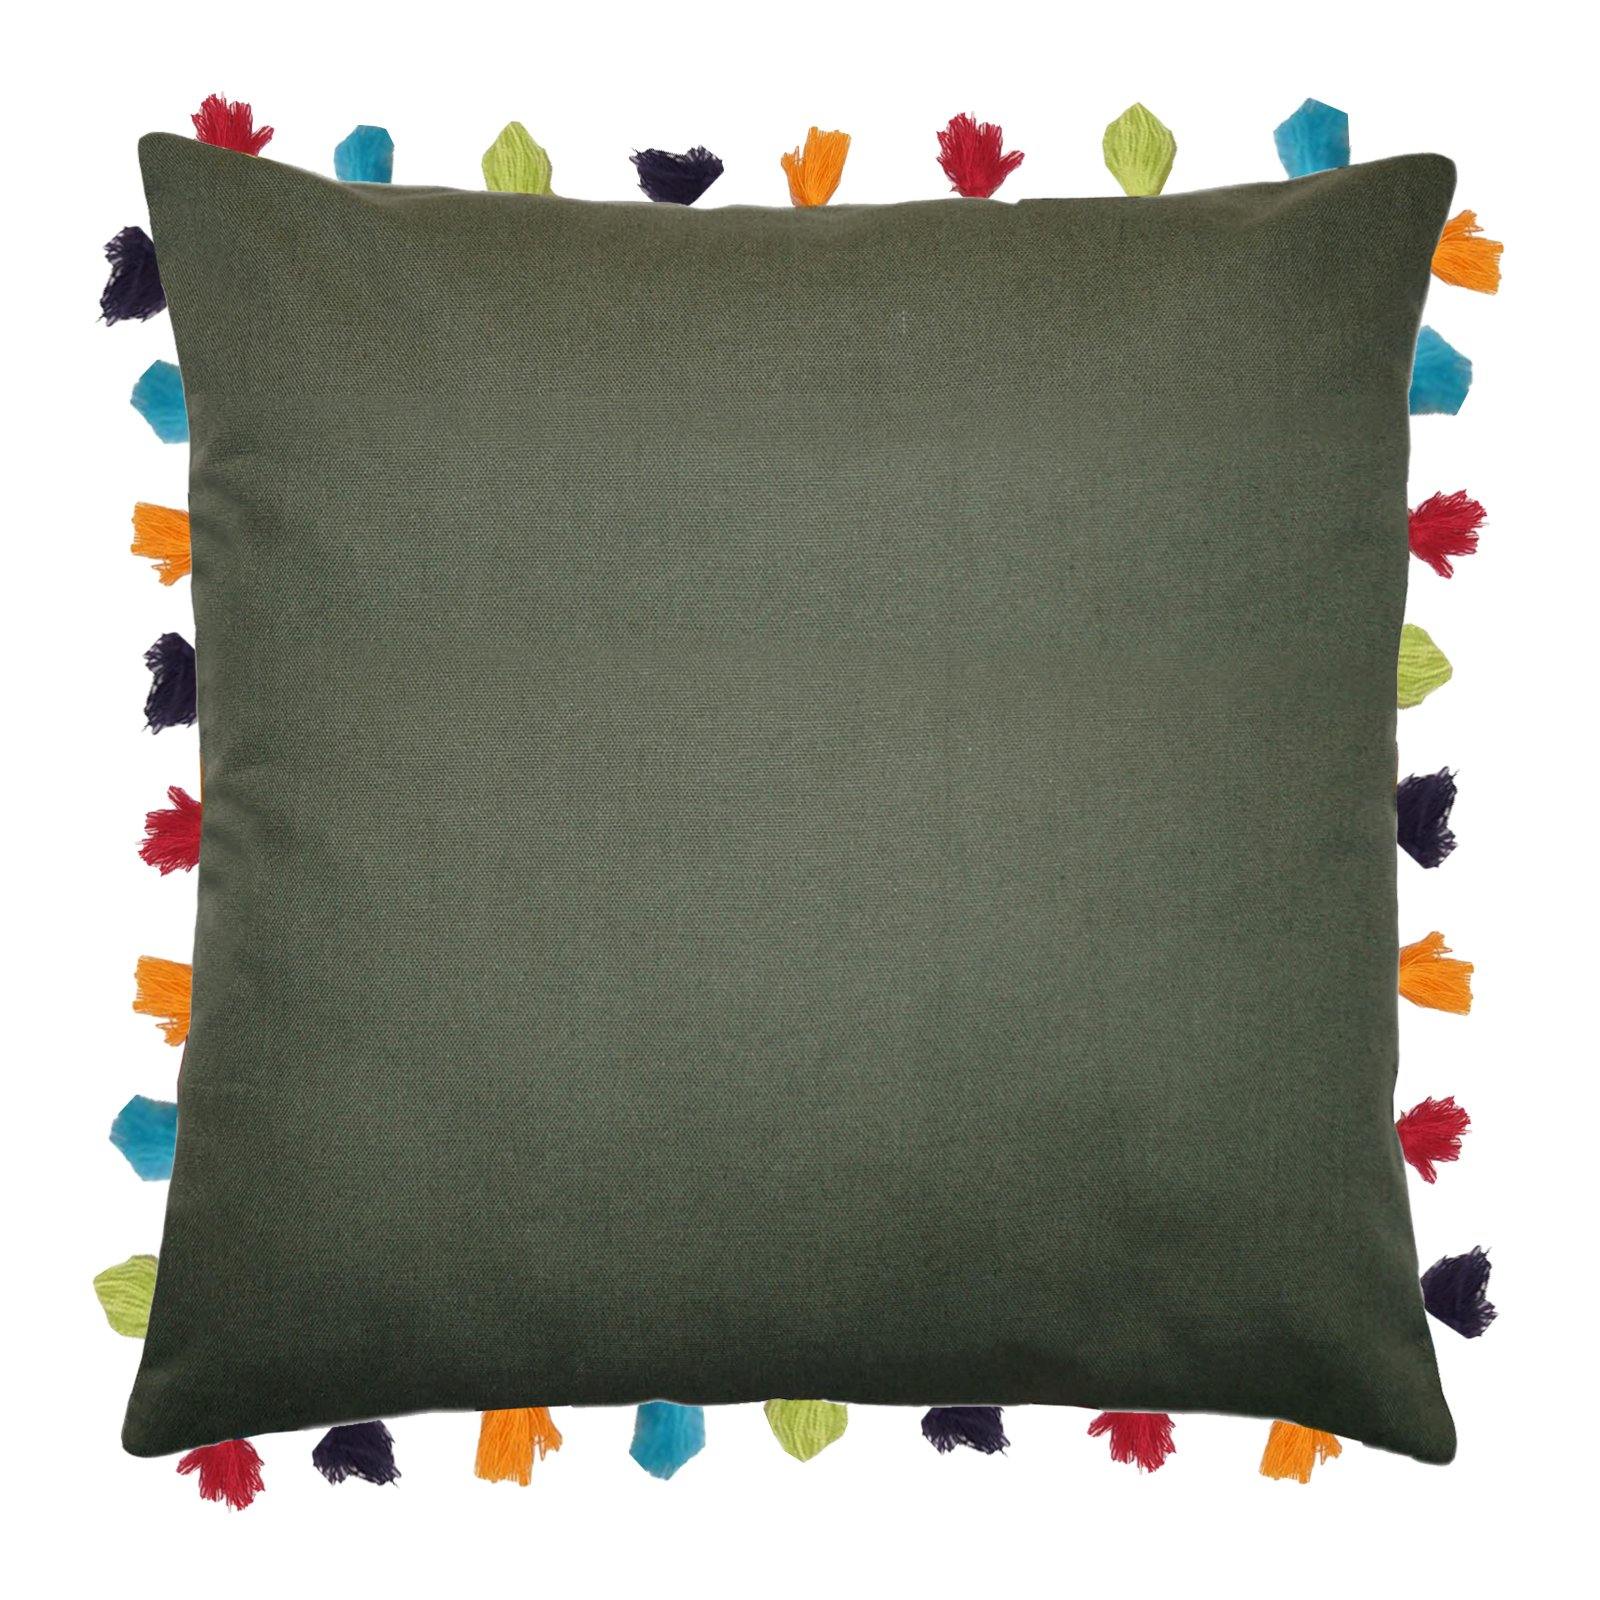 Lushomes Vineyard Green Cushion Cover with Colorful tassels (Single pc, 24 x 24”) - Lushomes